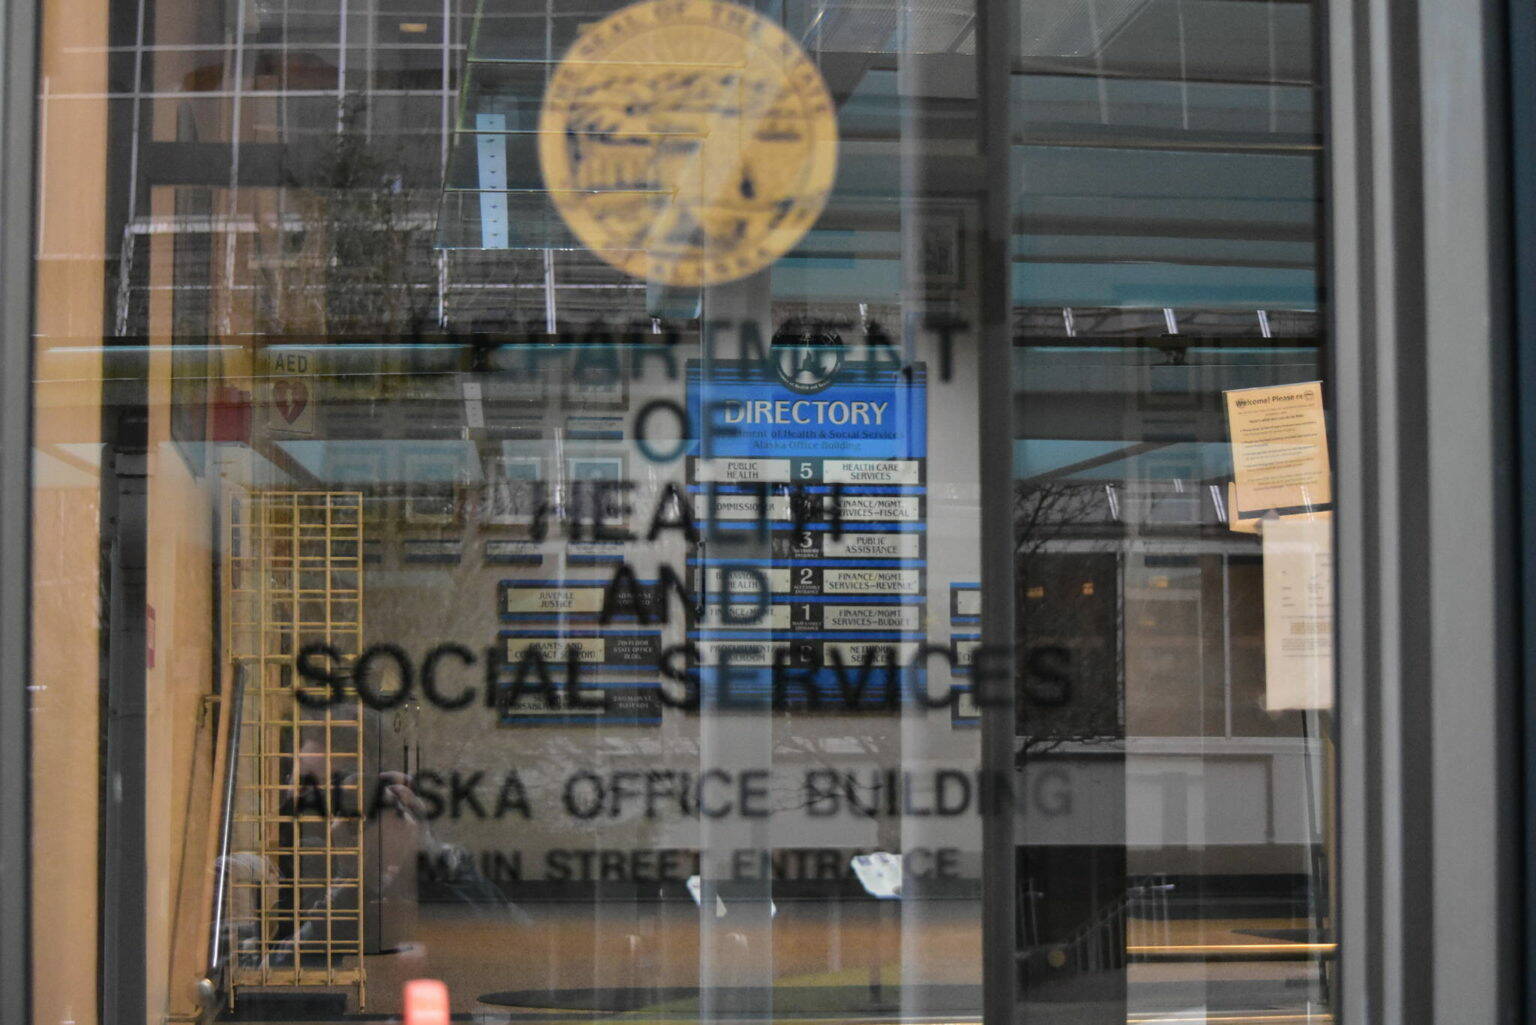 The entrance to the Alaska Department of Health and Social Services building in downtown Juneau on Jan. 14, 2021. Gov. Mike Dunleavy has twice proposed splitting the department using an executive order, but the Division of Legislative Legal Services has raised issues with the most recent order. (Peter Segall / Juneau Empire file)